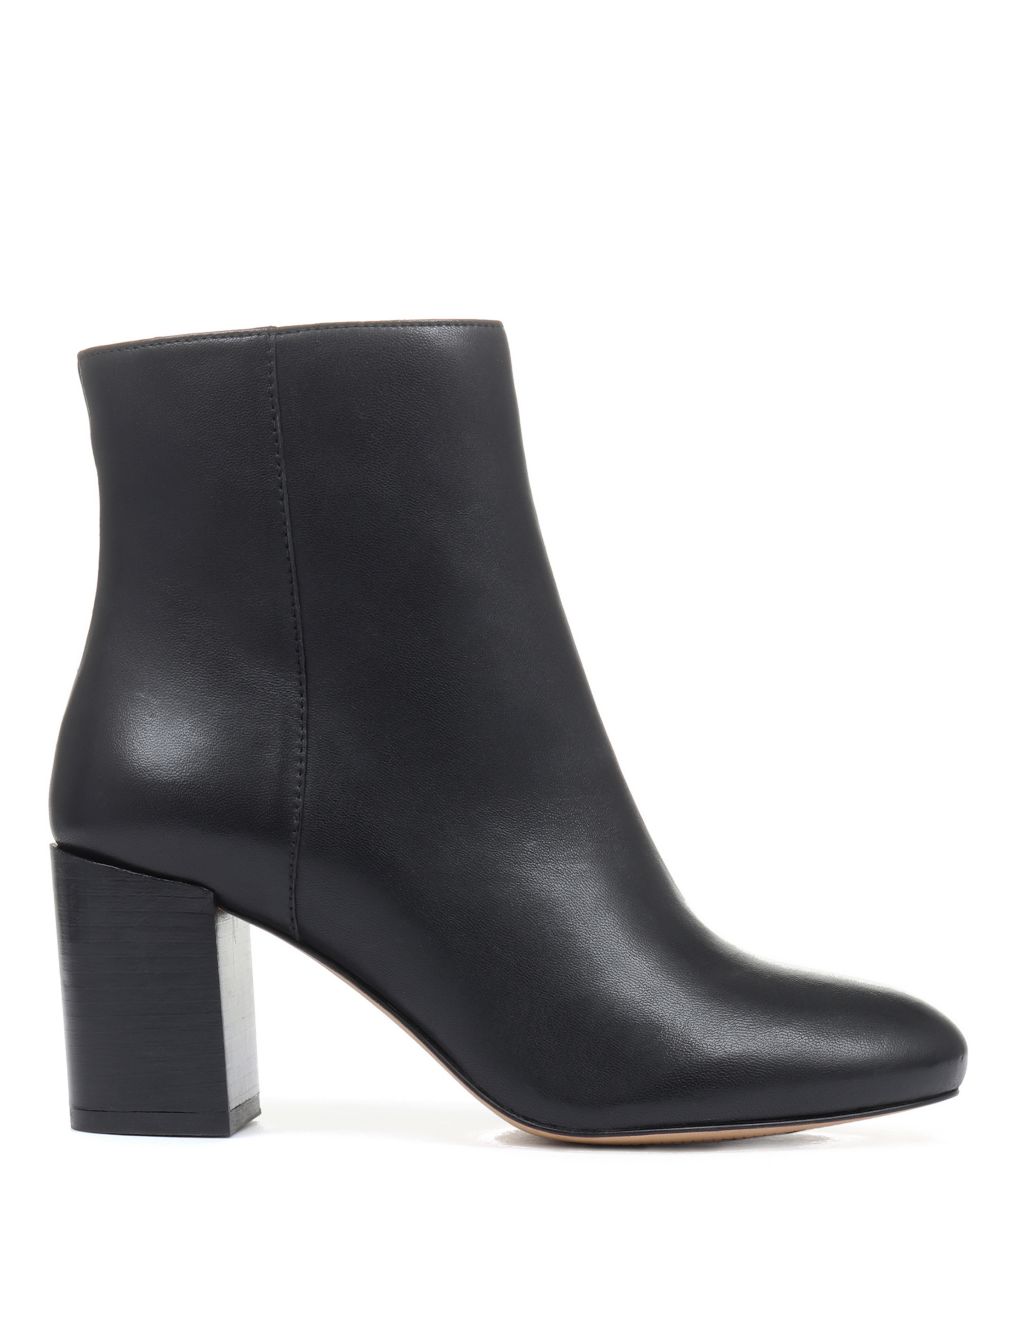 Leather Block Heel Ankle Boots image 4